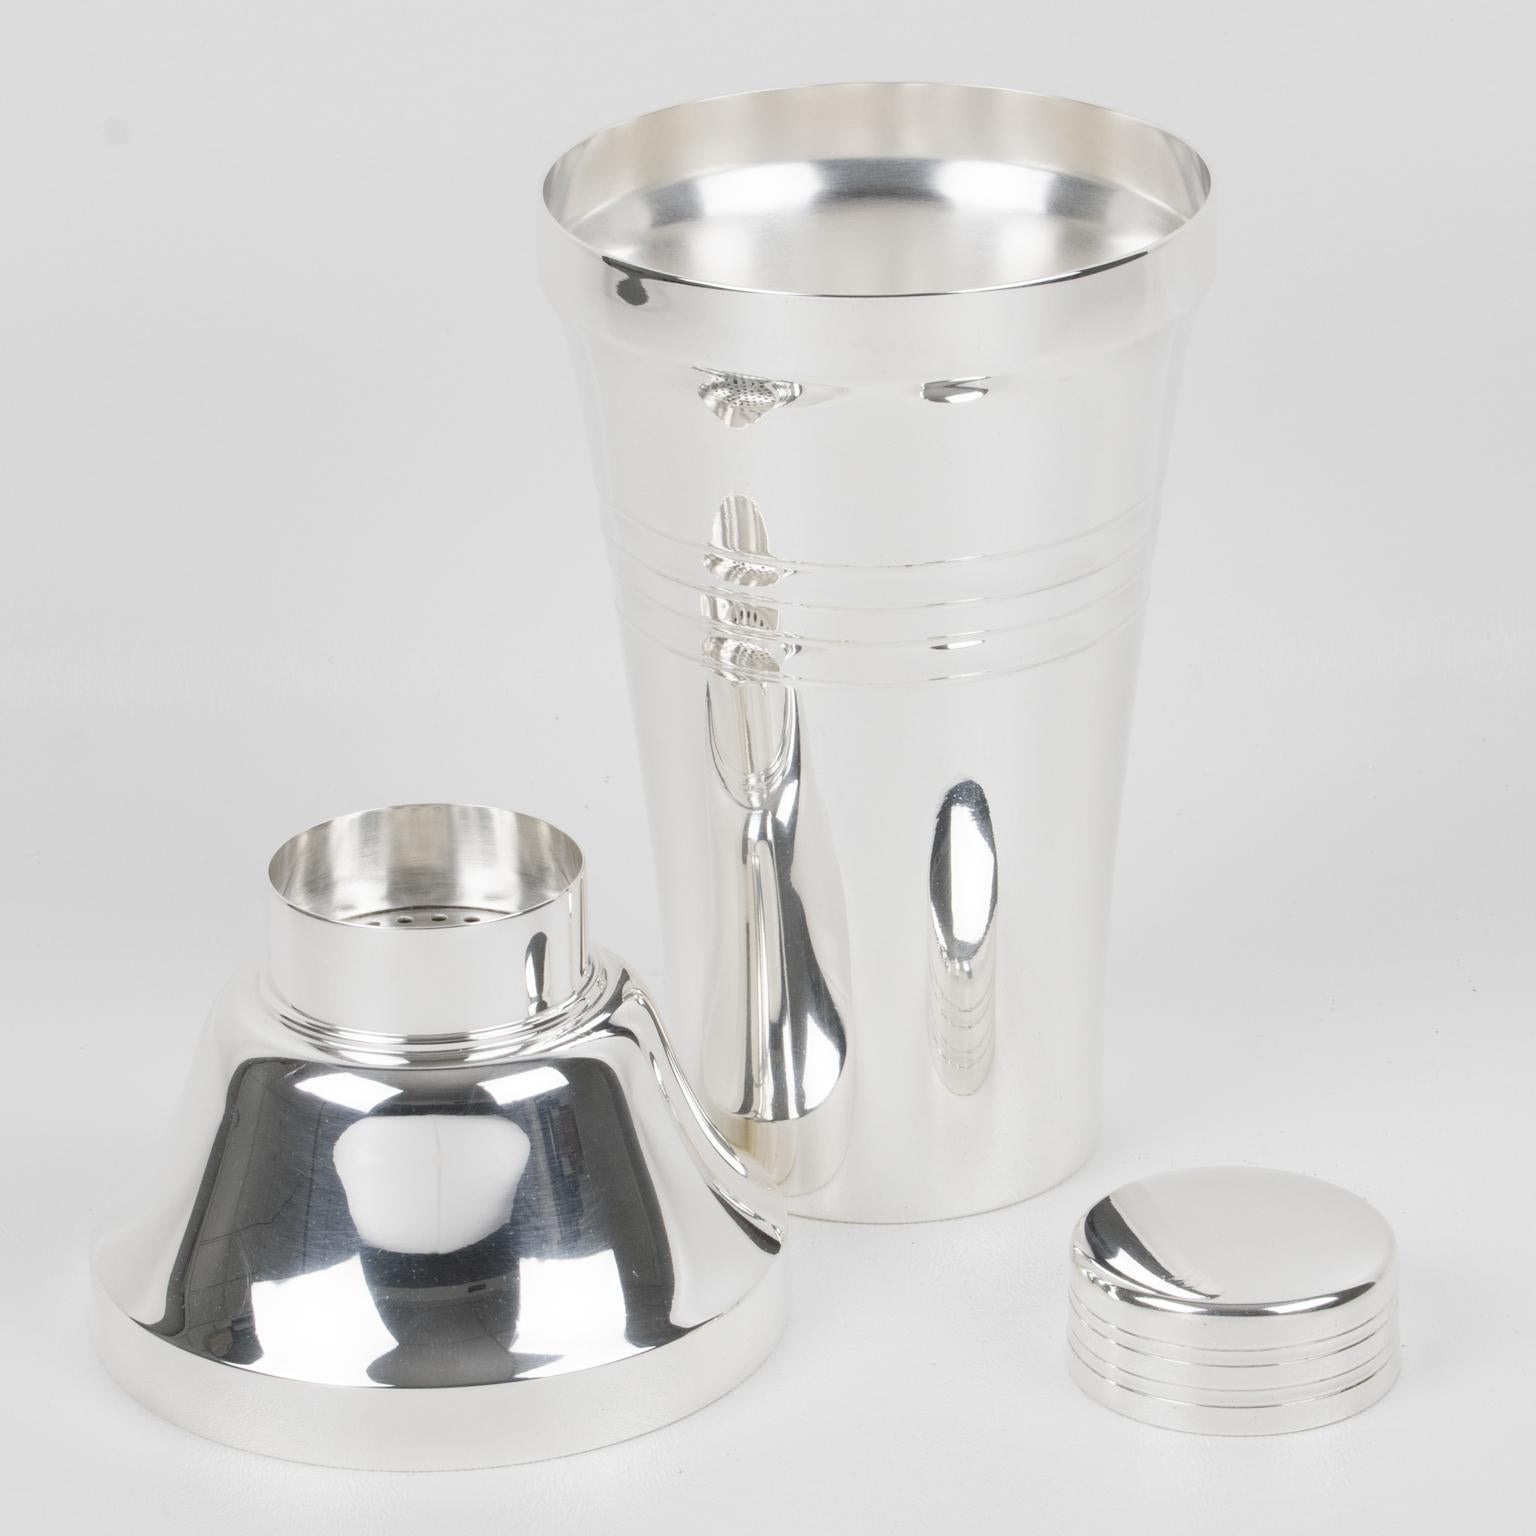 Silversmith Saint Medard, Paris, crafted this stylish Art Deco silver plate cylindrical cocktail or Martini shaker in the 1940s. The three-sectioned cocktail shaker has a removable cap and filter strainer. The piece boasts a lovely Art Deco design